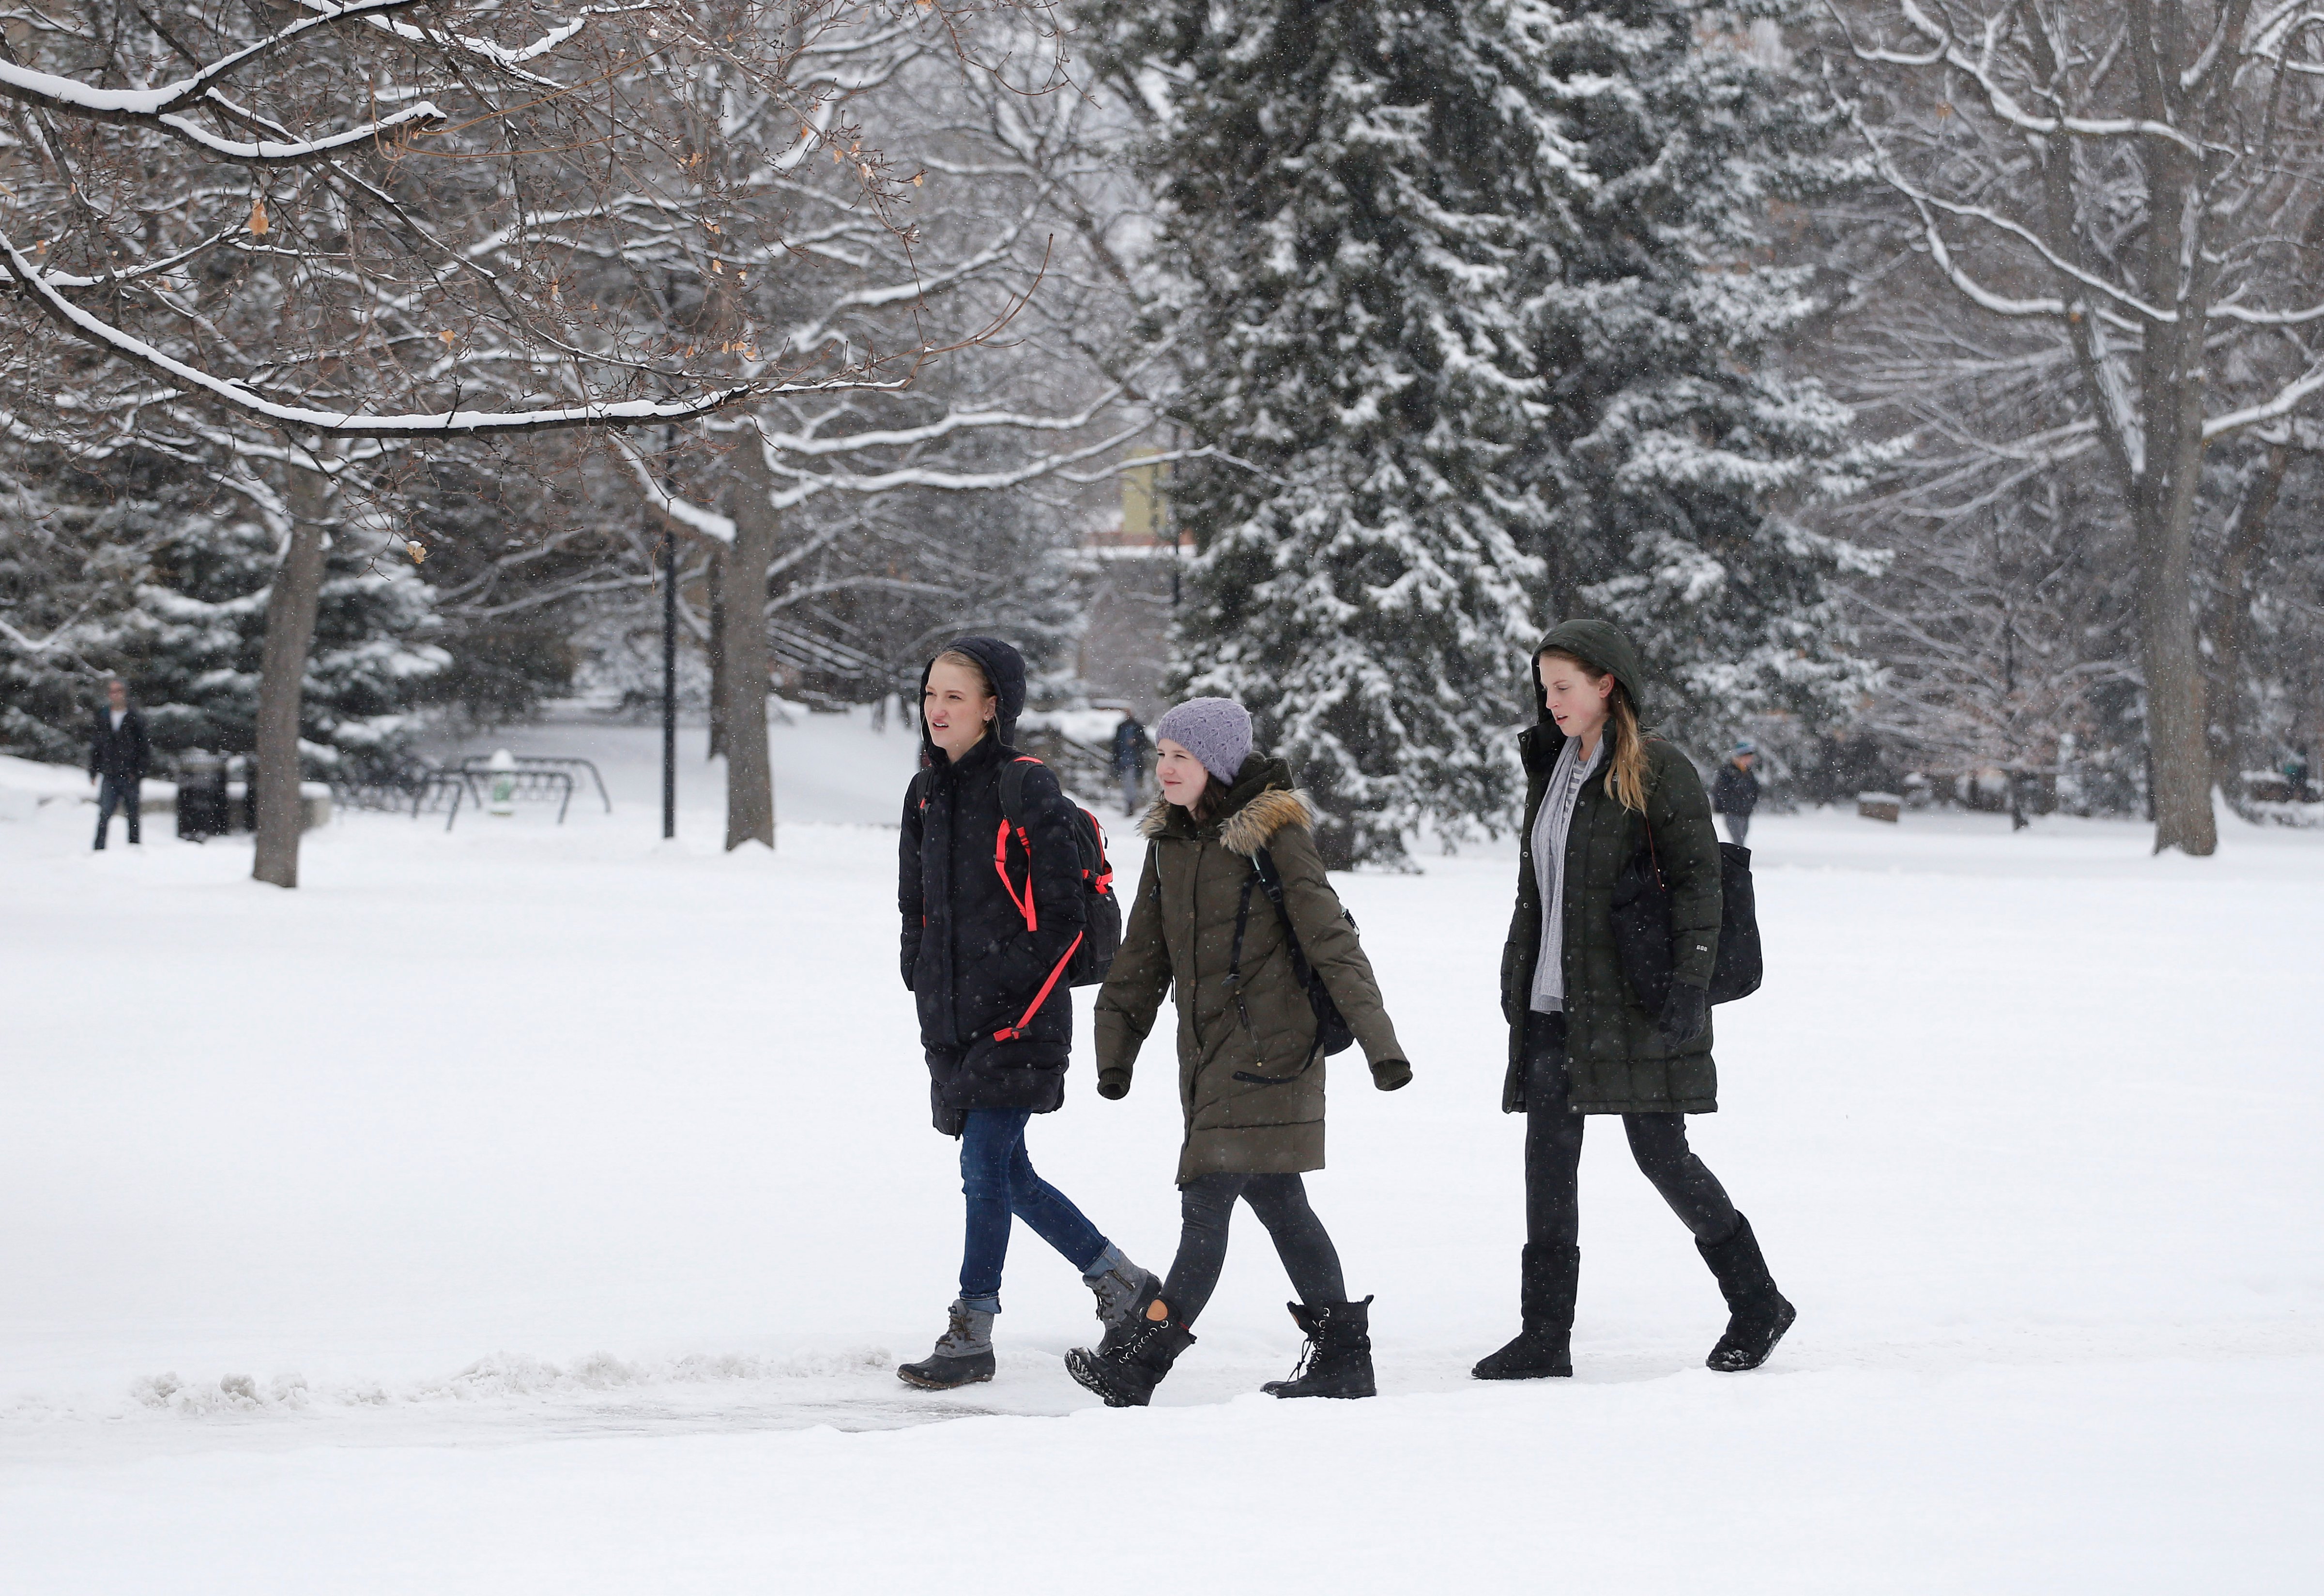 Students walk between classes during a fresh snow fall on the campus of the University of Colorado, in Boulder, Colo. on Feb. 1, 2016. (Brennan Linsley—AP)